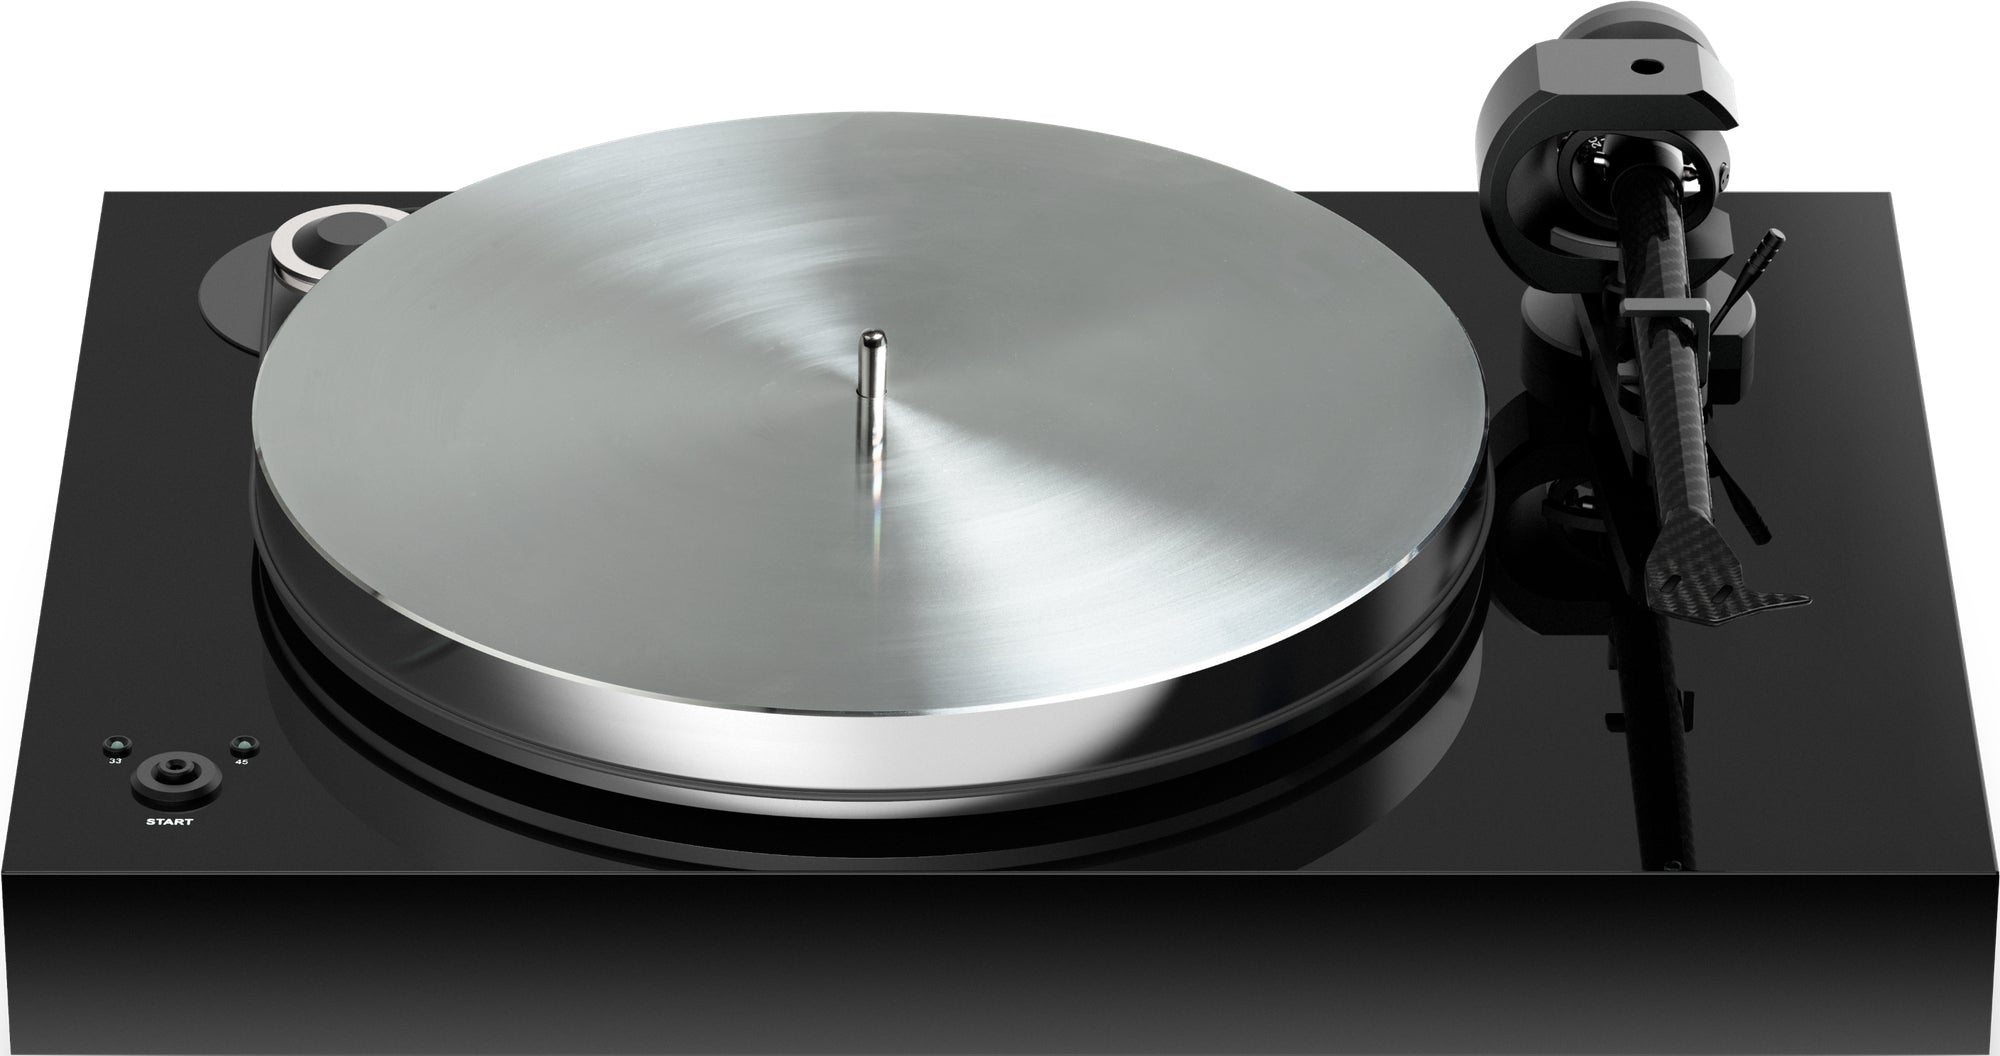 PRO-JECT X8 HIGH-END TURNTABLE WITH TRUE BALANCED CONNECTION